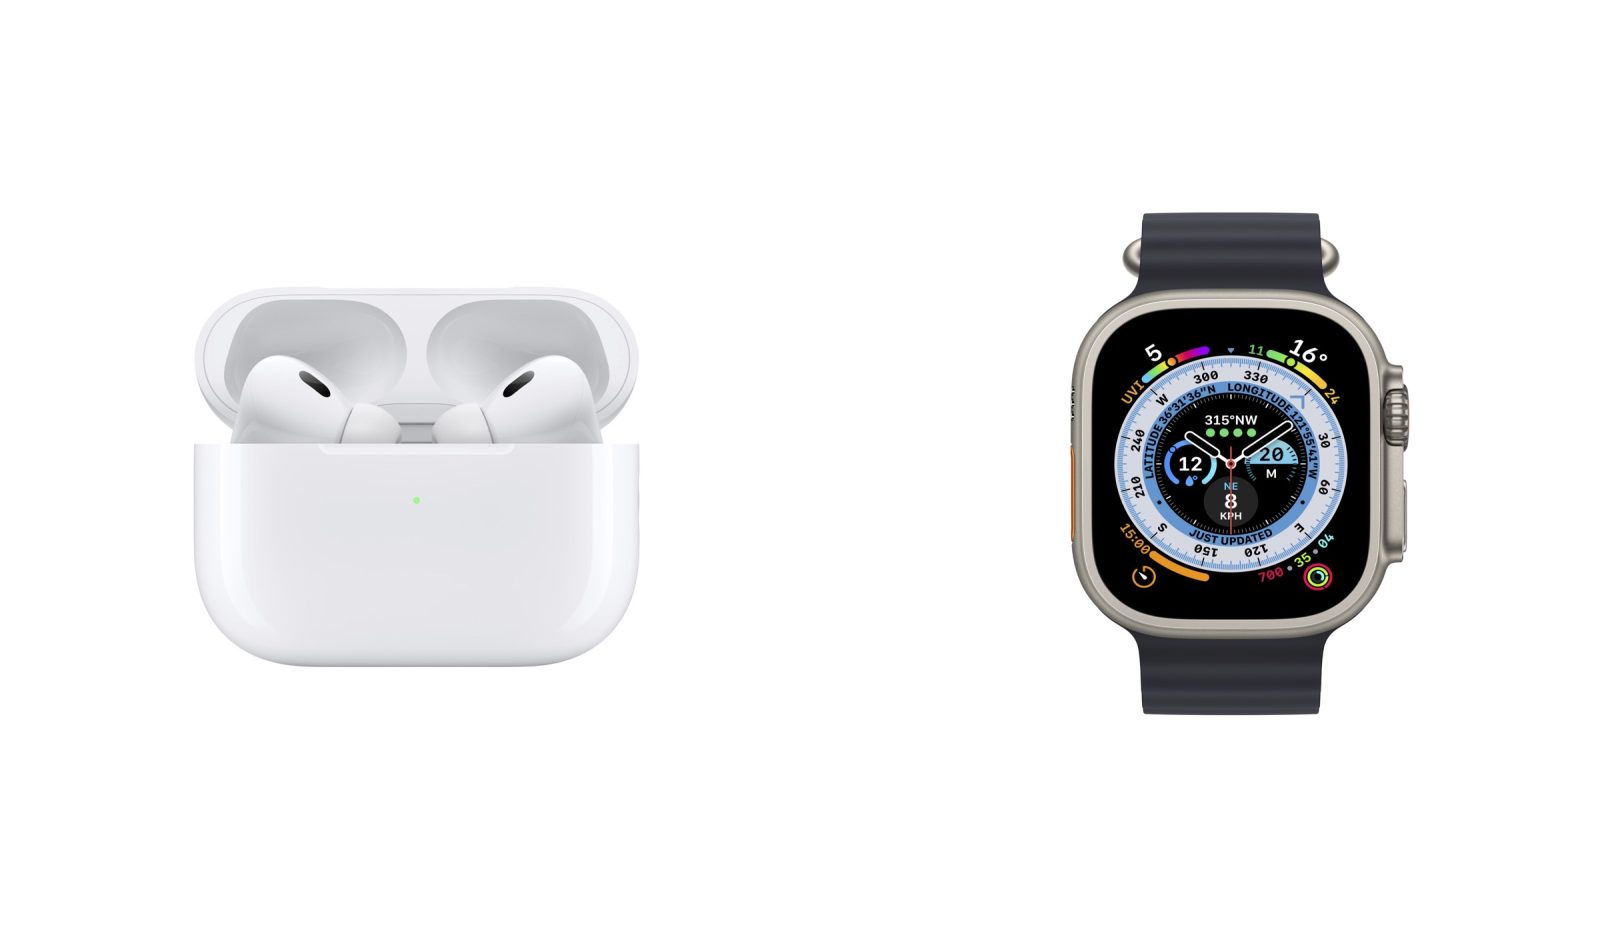 You can grab an AirPods Pro 2nd Gen or the Apple Watch Ultra today onward